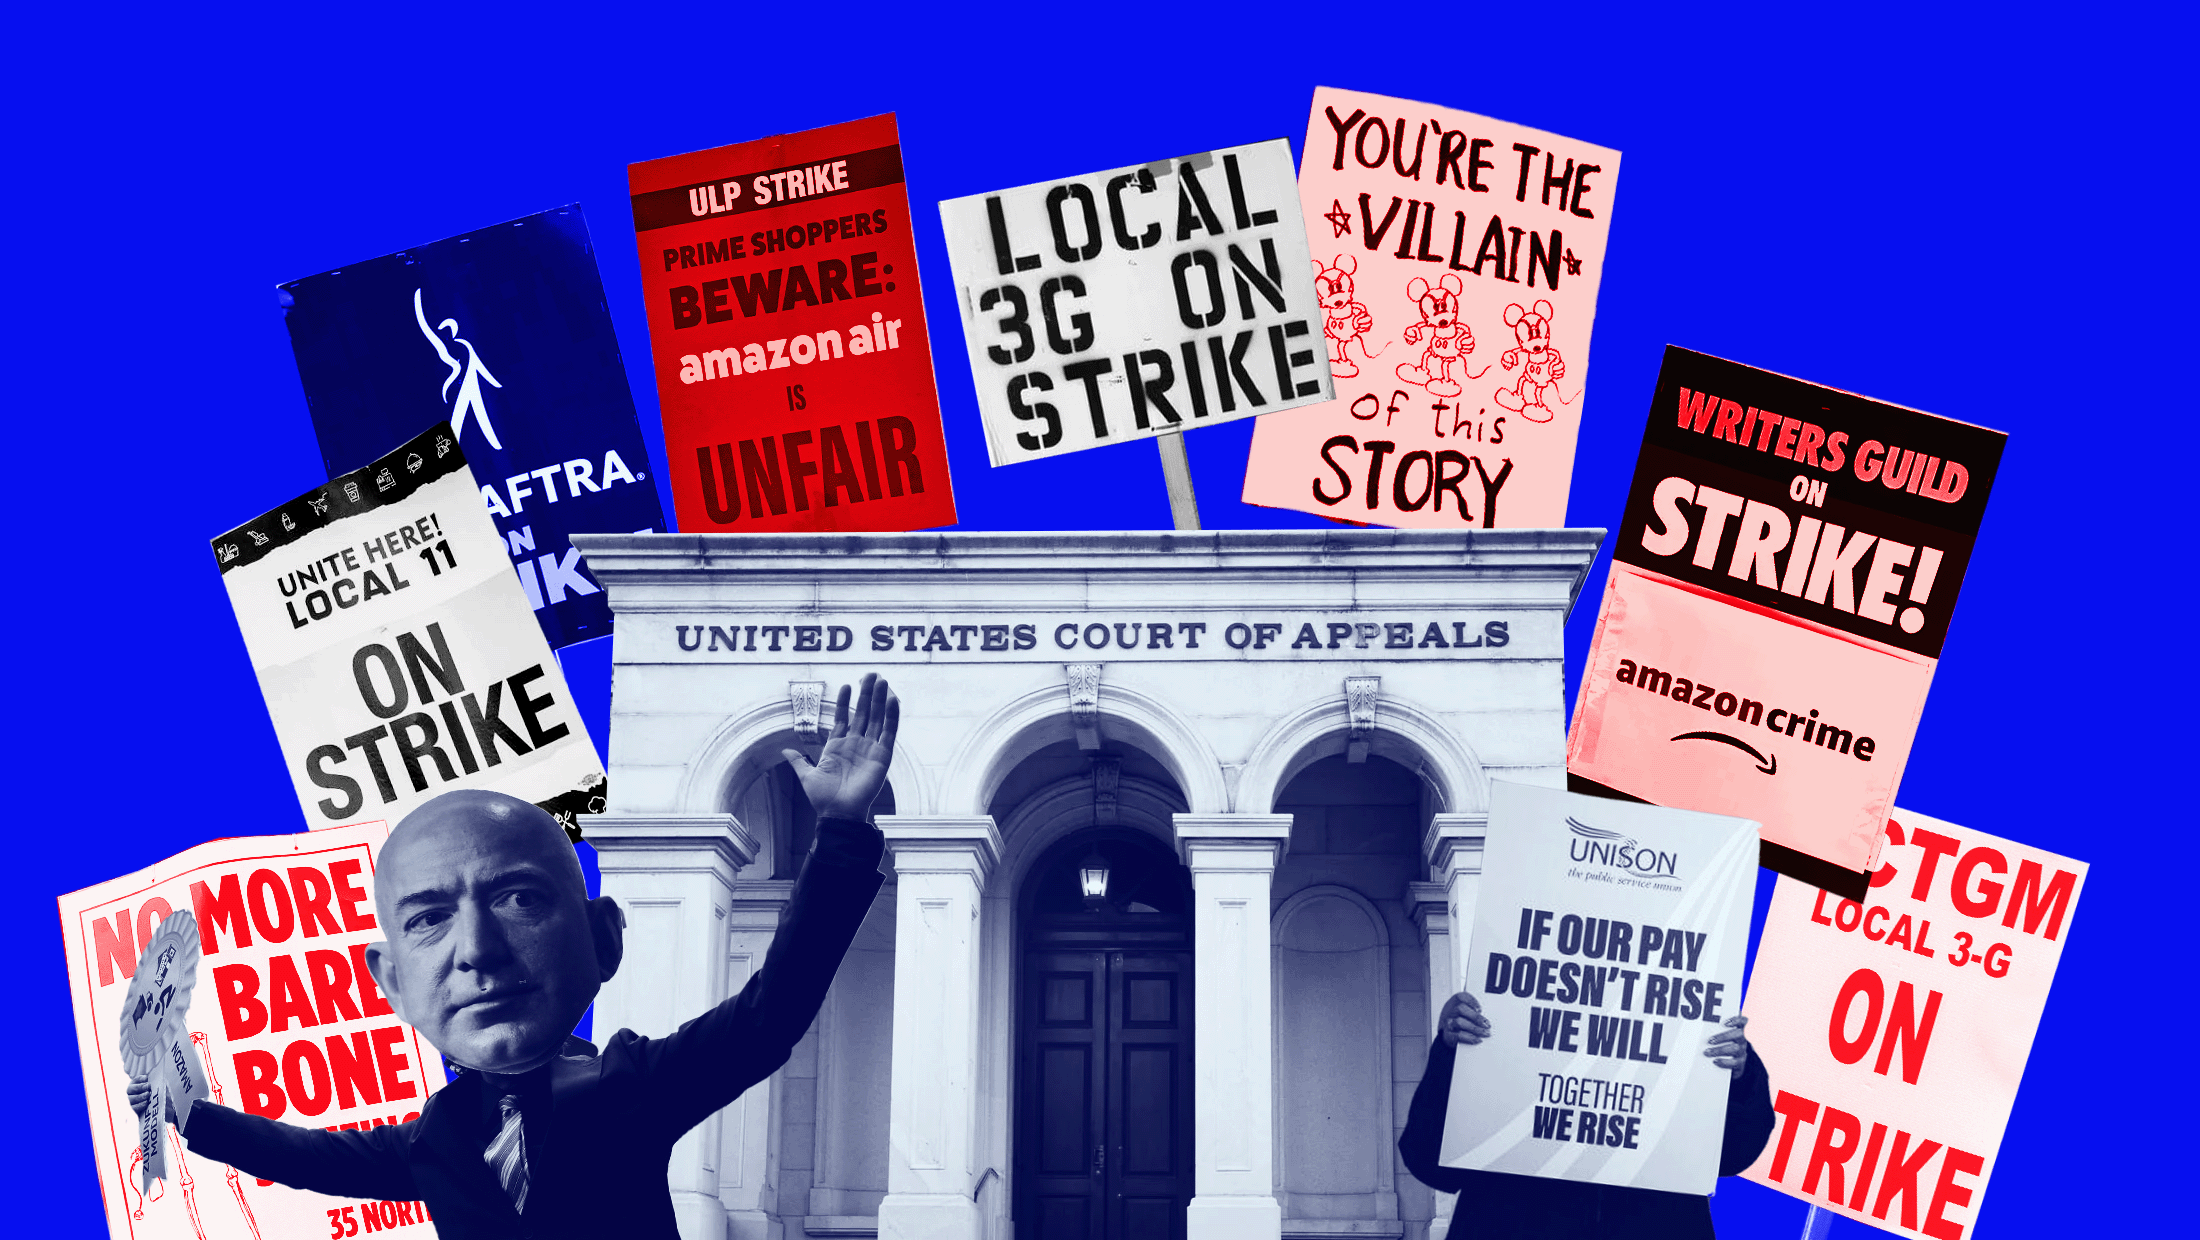 Blue background with image of a United States Court of Appeals in the middle surrounded by protest signs of different workers on strike and an image of Jeff Bezos.